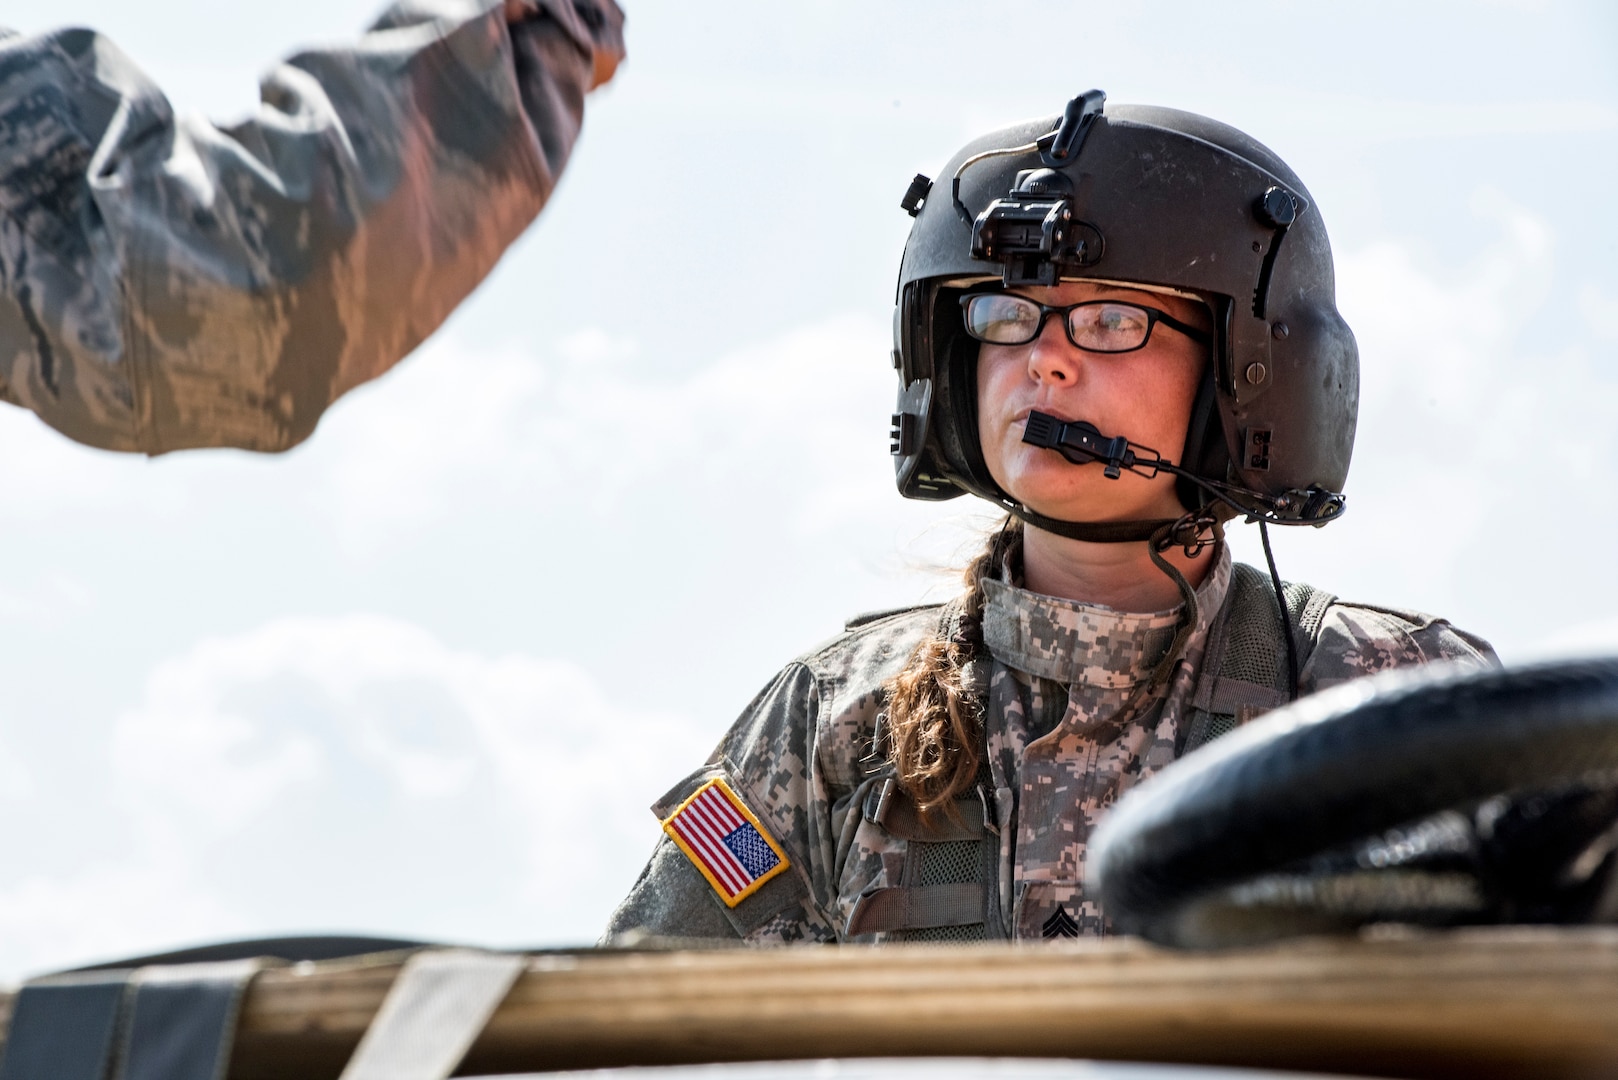 Army Sgt. Shannon Baumann, Texas Army National Guard Company C, 2-149 Aviation crew chief, inspects the rigging of an A-22 cargo bag with 2,000 pounds of “relief supplies” in preparation for a sling load mission as part of OPERATION Lone Star Vigilance June 10, 2018, at Joint Base San Antonio-Camp Bullis, Texas. Operation Lone Star Vigilance was a joint-training exercise involving Active-Duty and Reserve Airmen and Soldiers from the Texas Army National Guard from installations across San Antonio. The multi-service missions saw the successful completion of aerial reconnaissance, sling loading of cargo, MEDEVAC hoists, personnel recovery and the simultaneous operation of multiple helicopter landing zones. (U.S. Air Force photo by Senior Airman Stormy Archer)